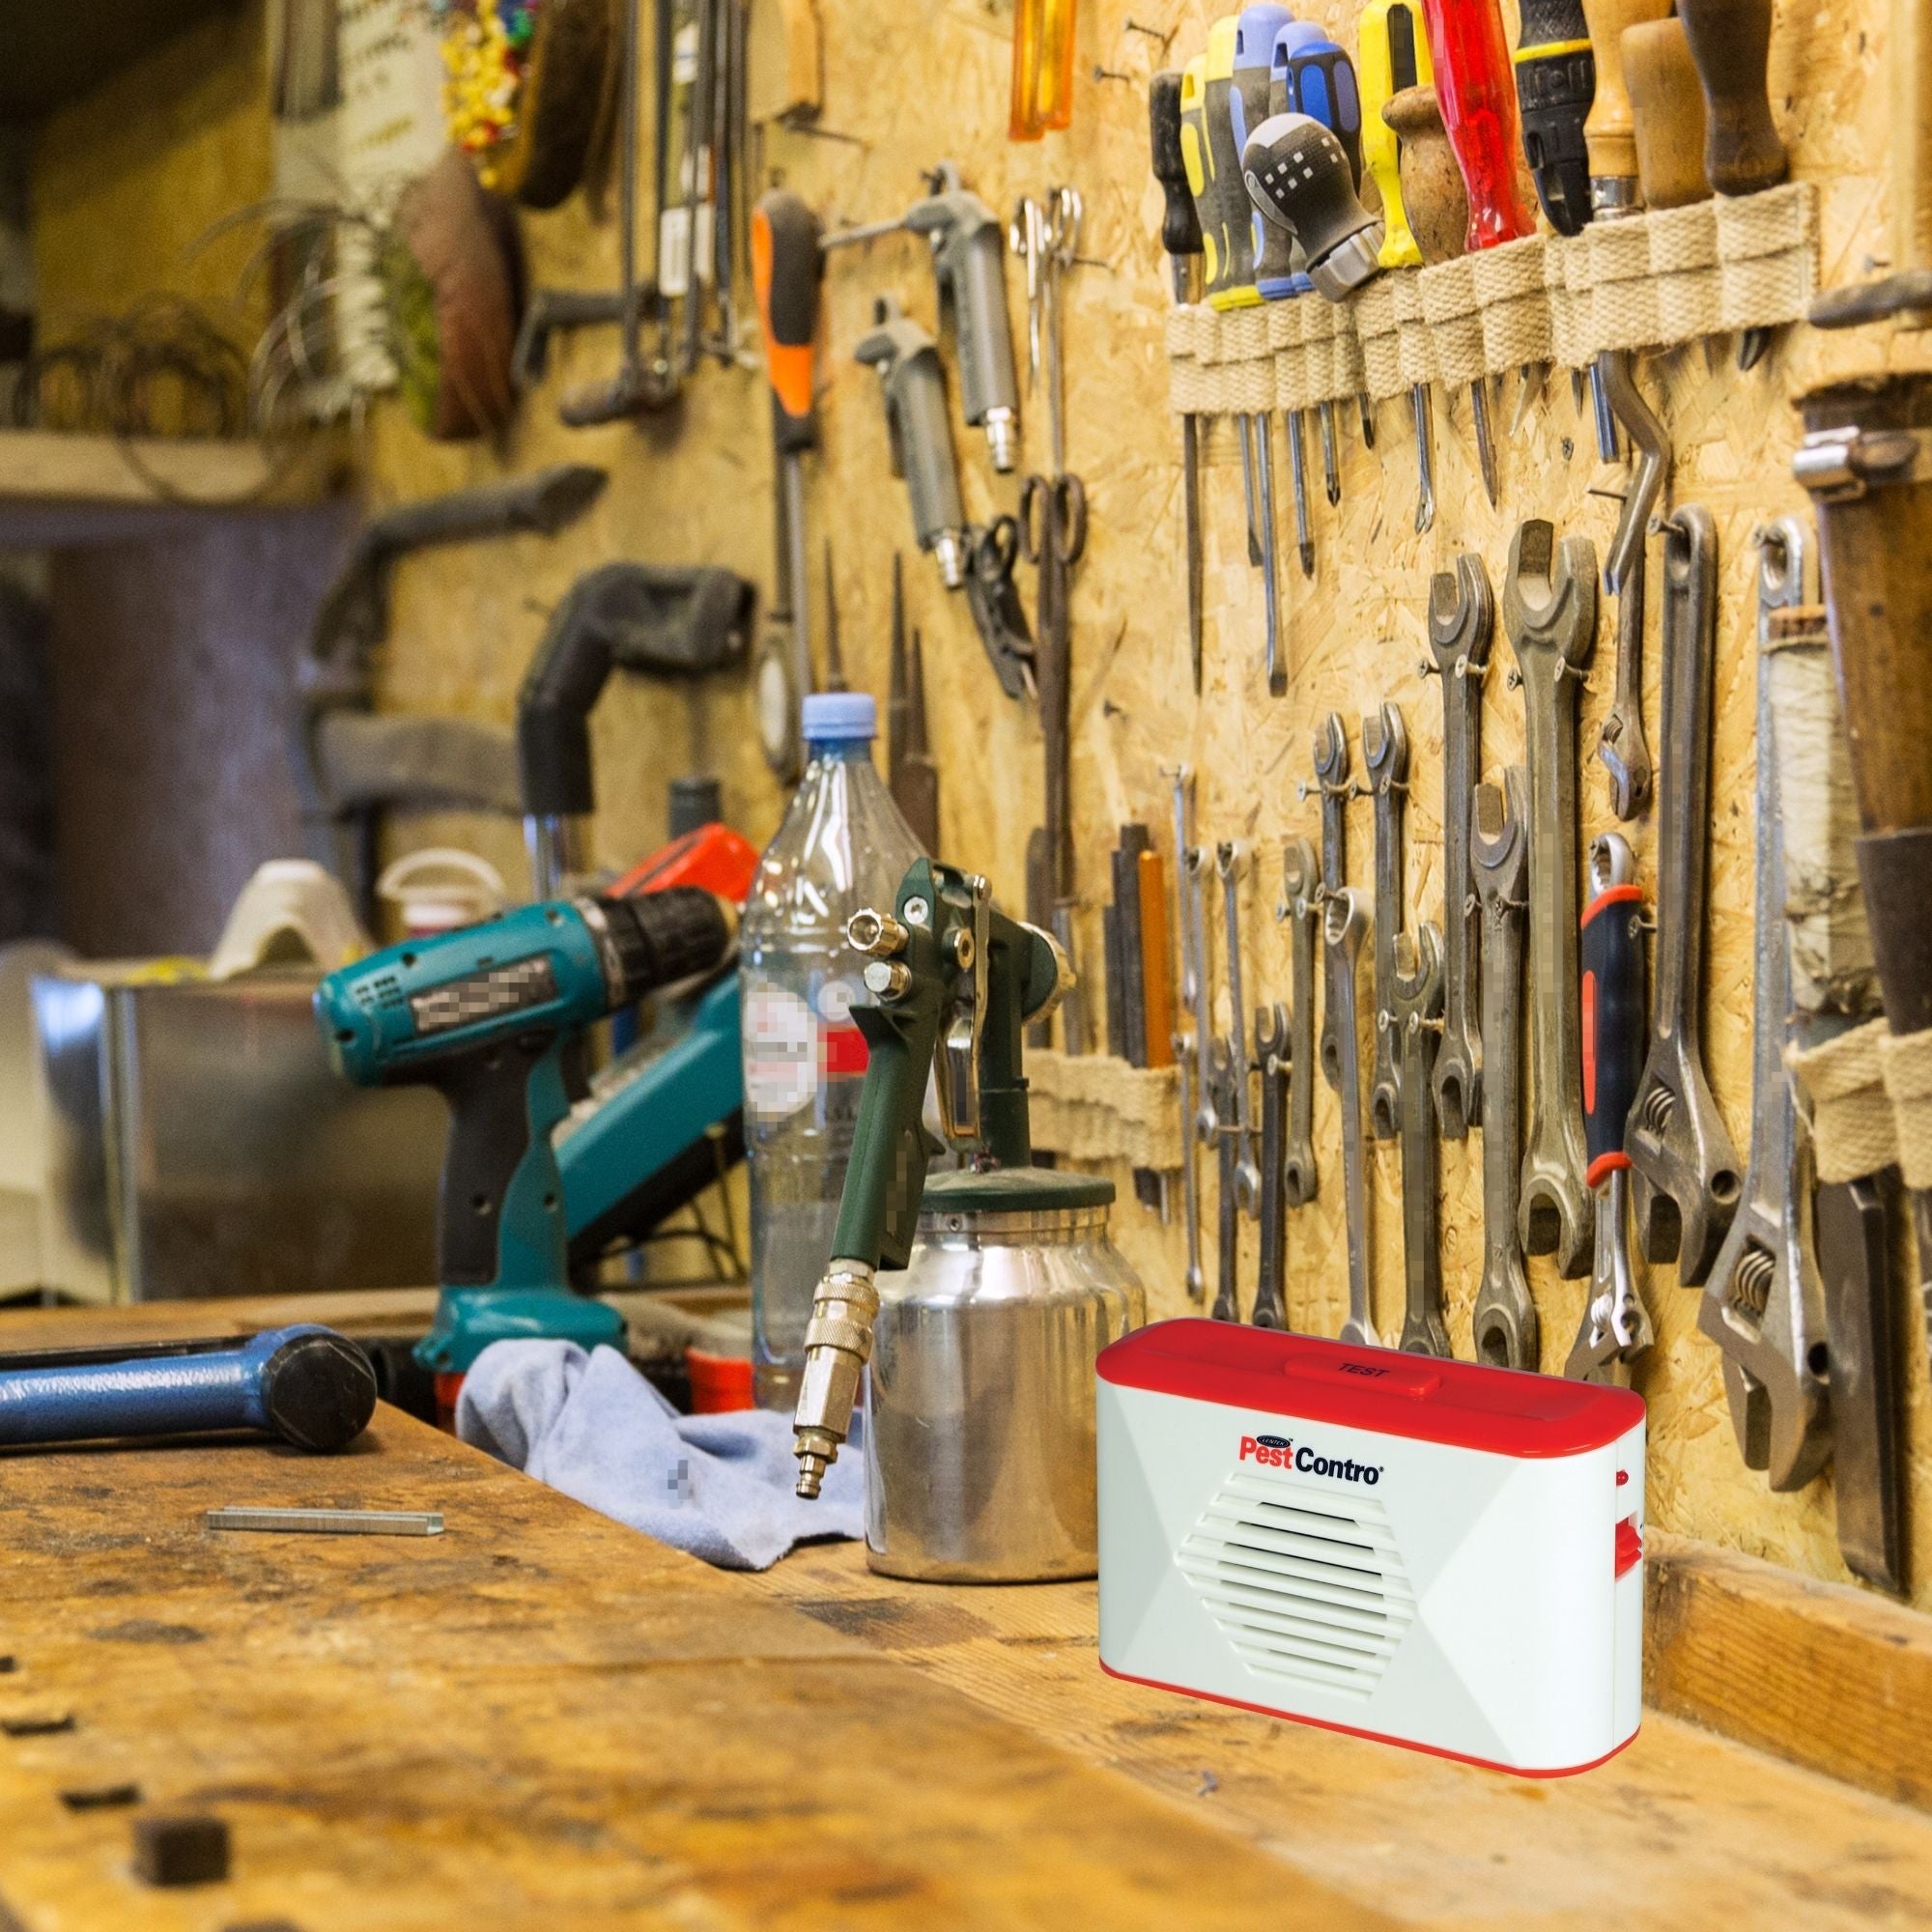 Lifestyle image of PestContro portable ultrasonic rodent repeller on a wooden work bench surrounded by tools